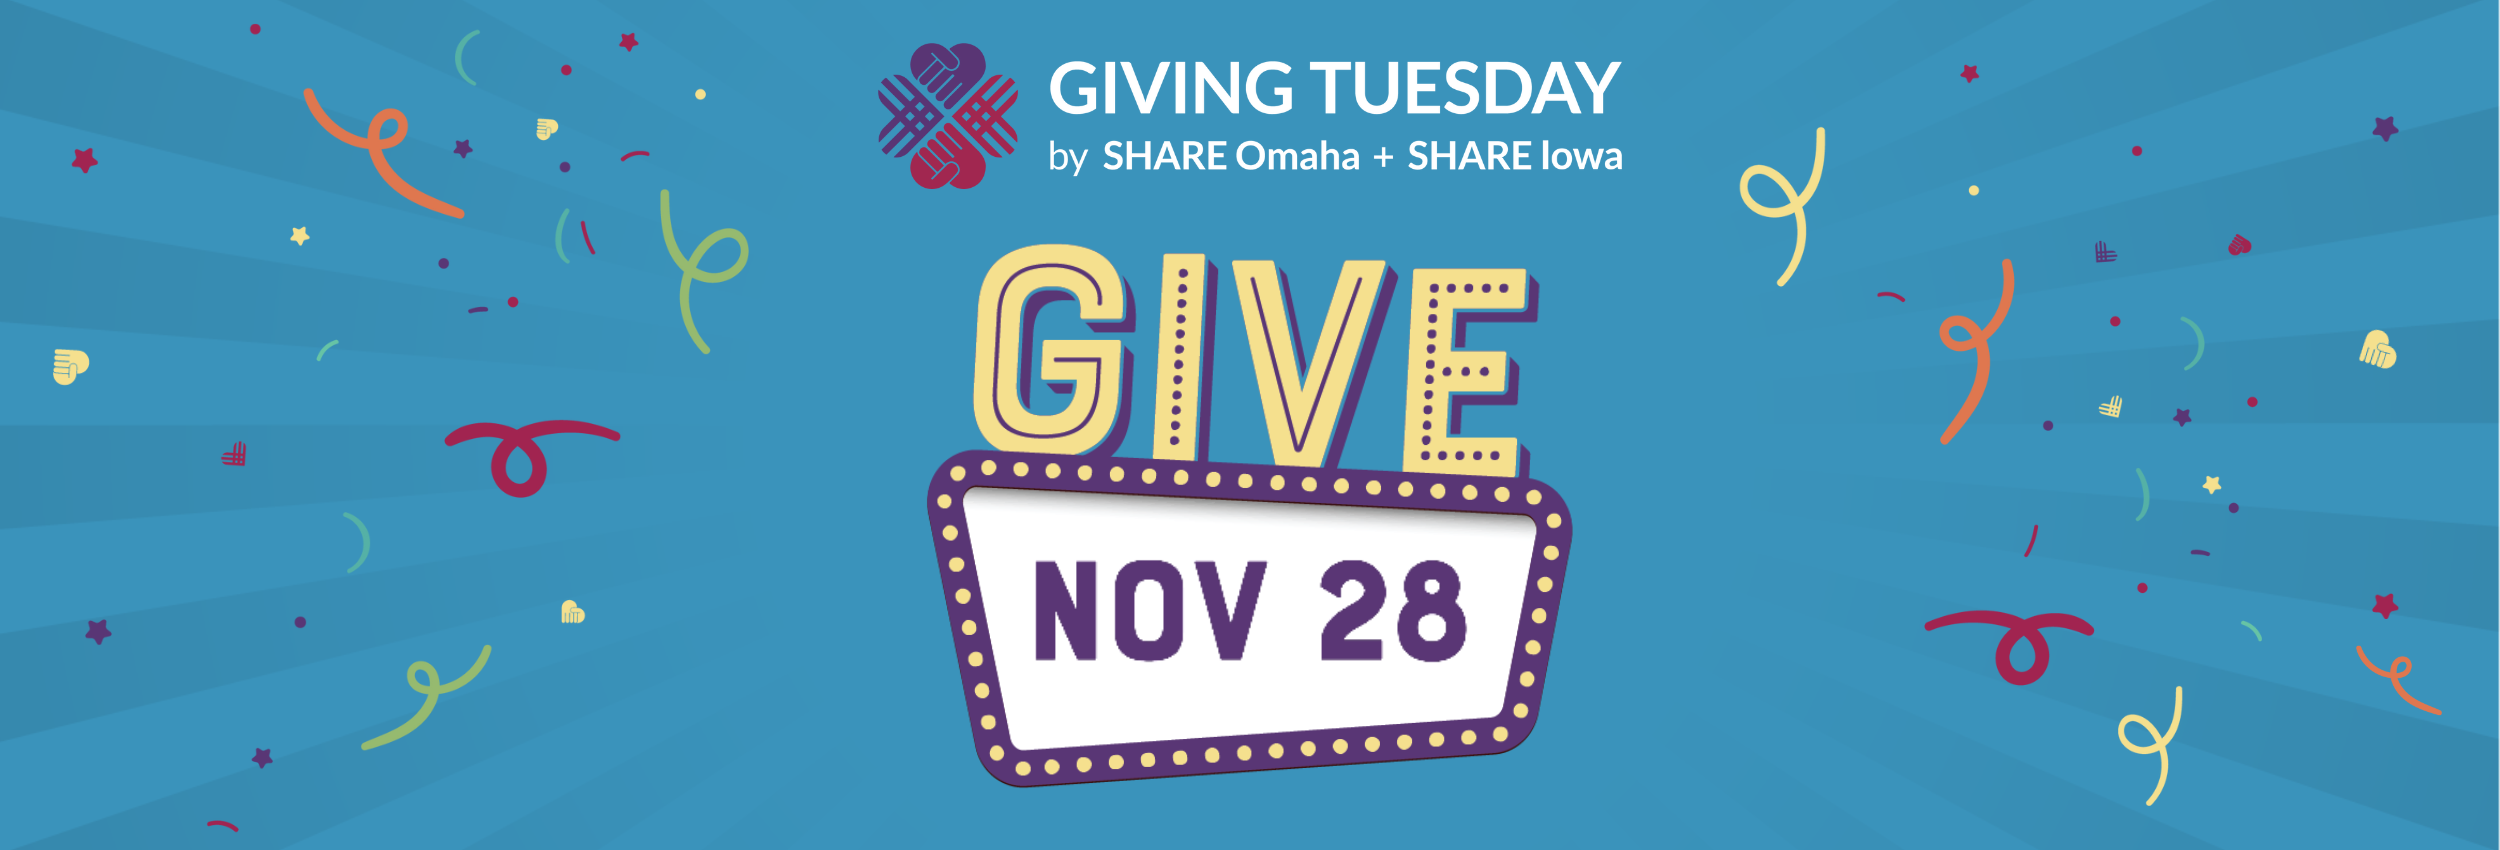 giving-tuesday-for-nonprofits-share-omaha